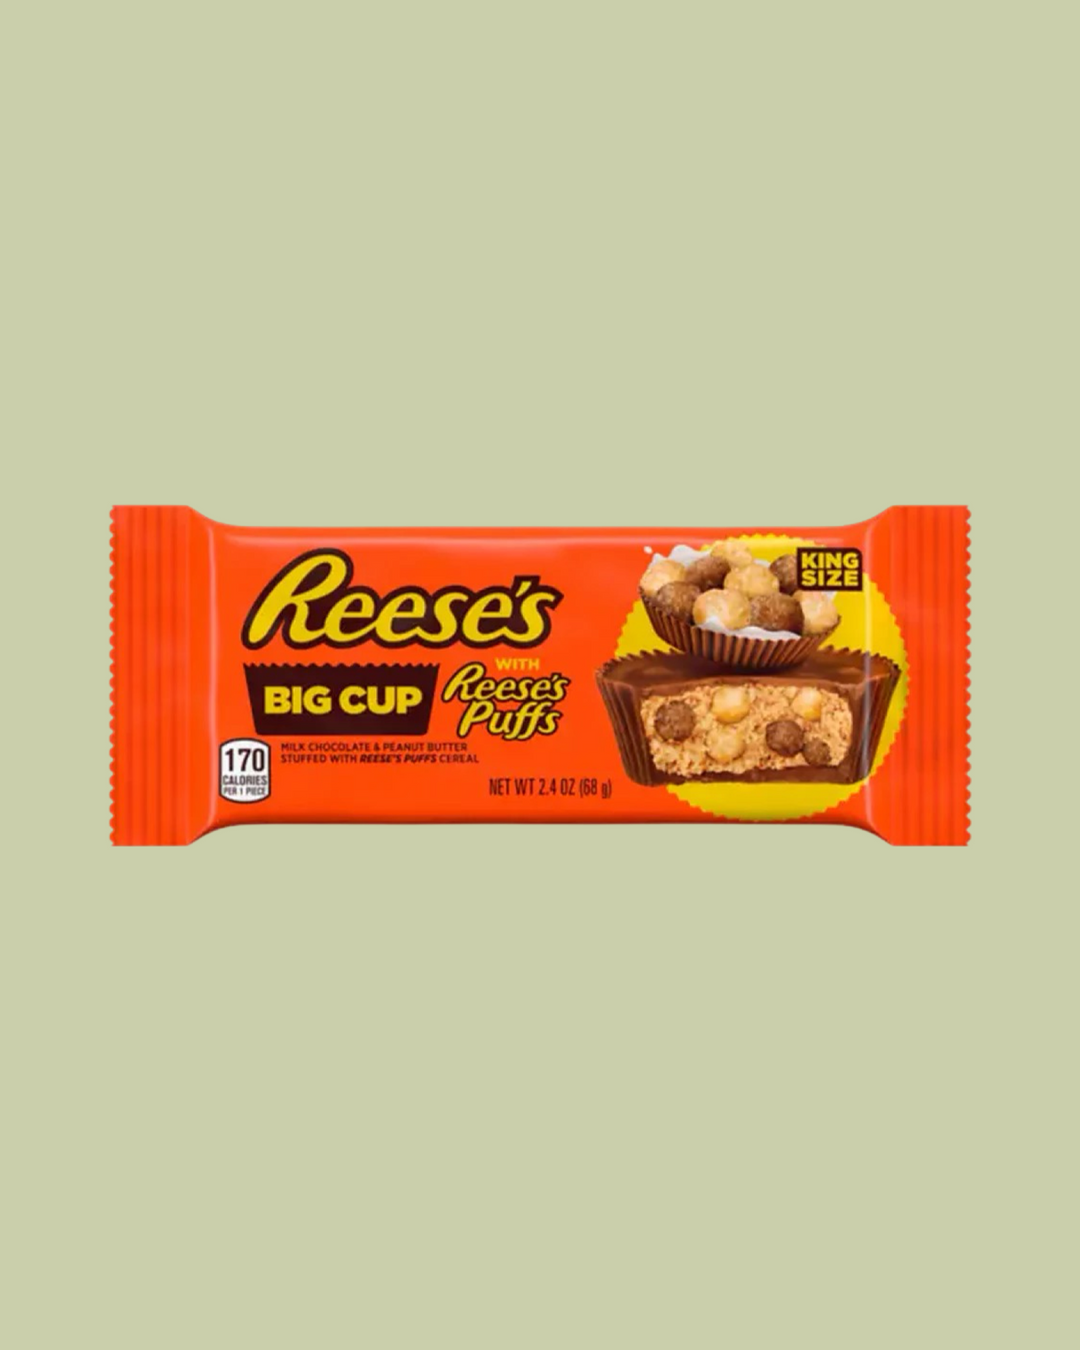 Reese's Big Cup Stuffed with Reese's Puffs King Size